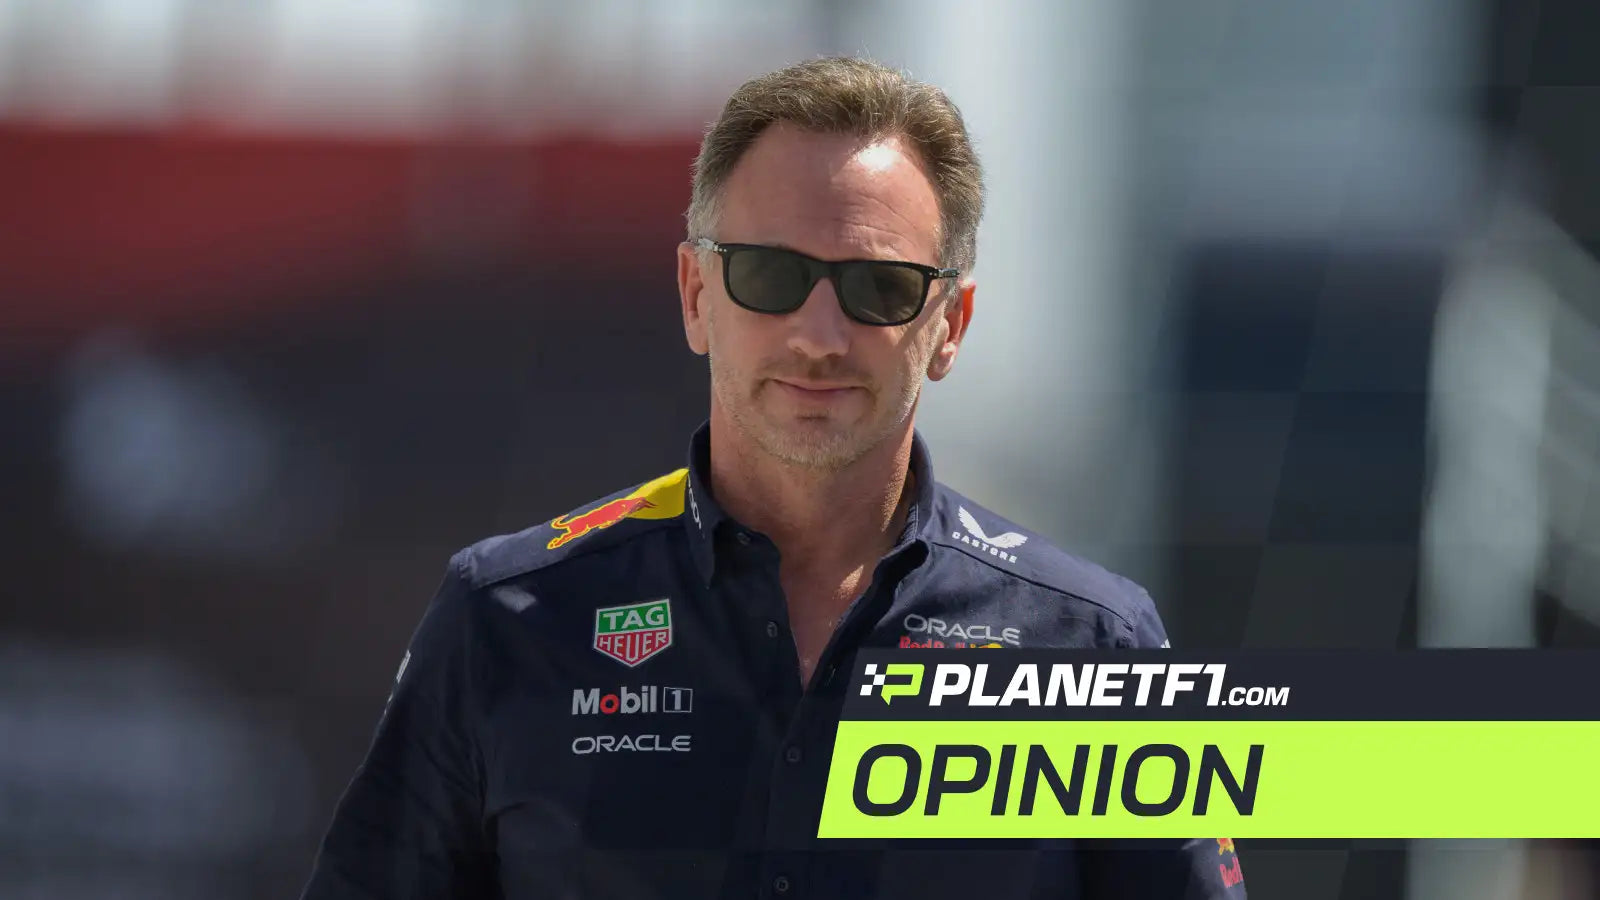 Has Red Bull reached uneasy truce after conclusion of Christian Horner investigation?